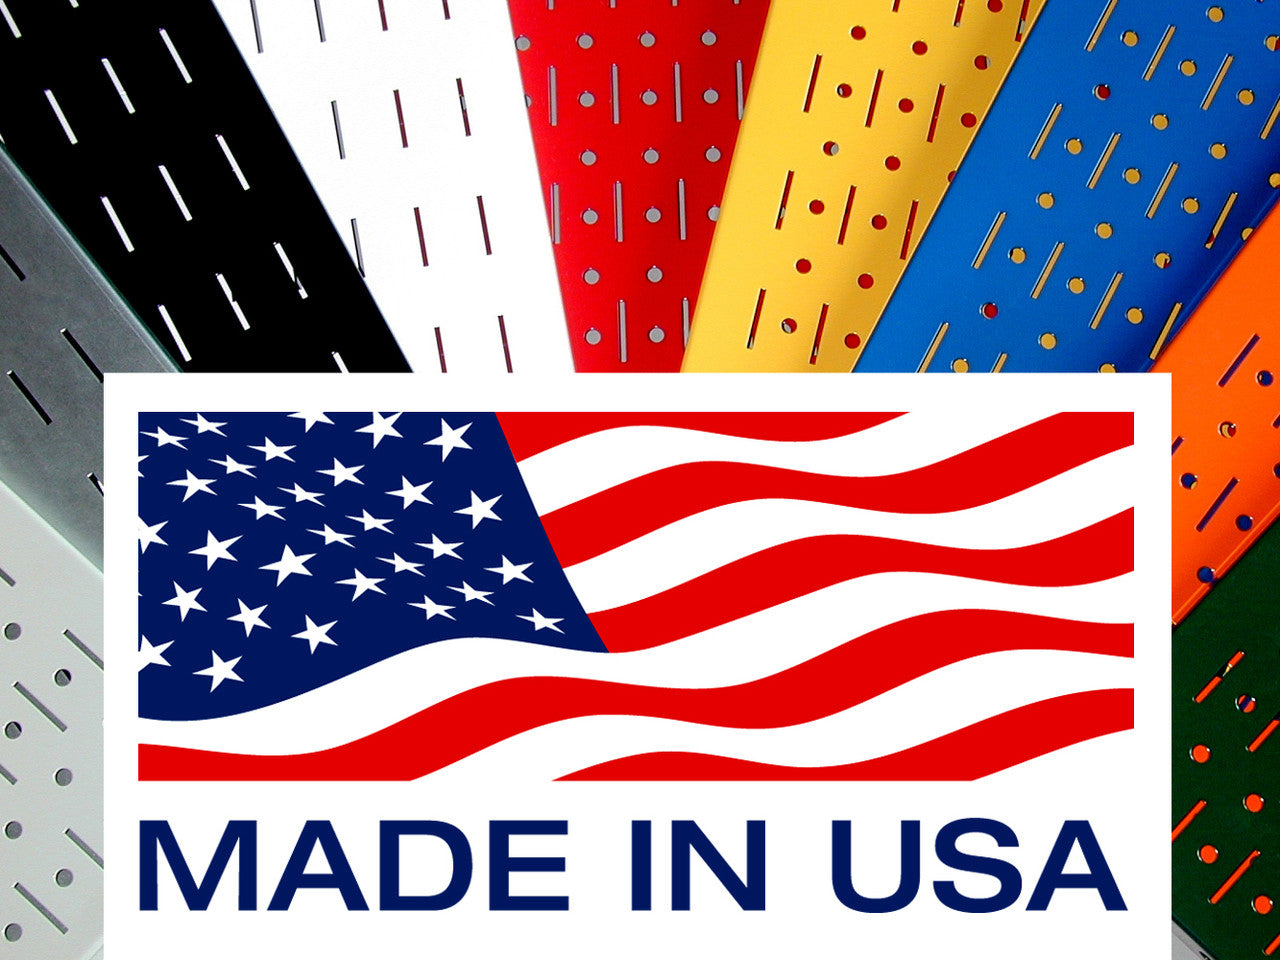 Storage Products Made in America